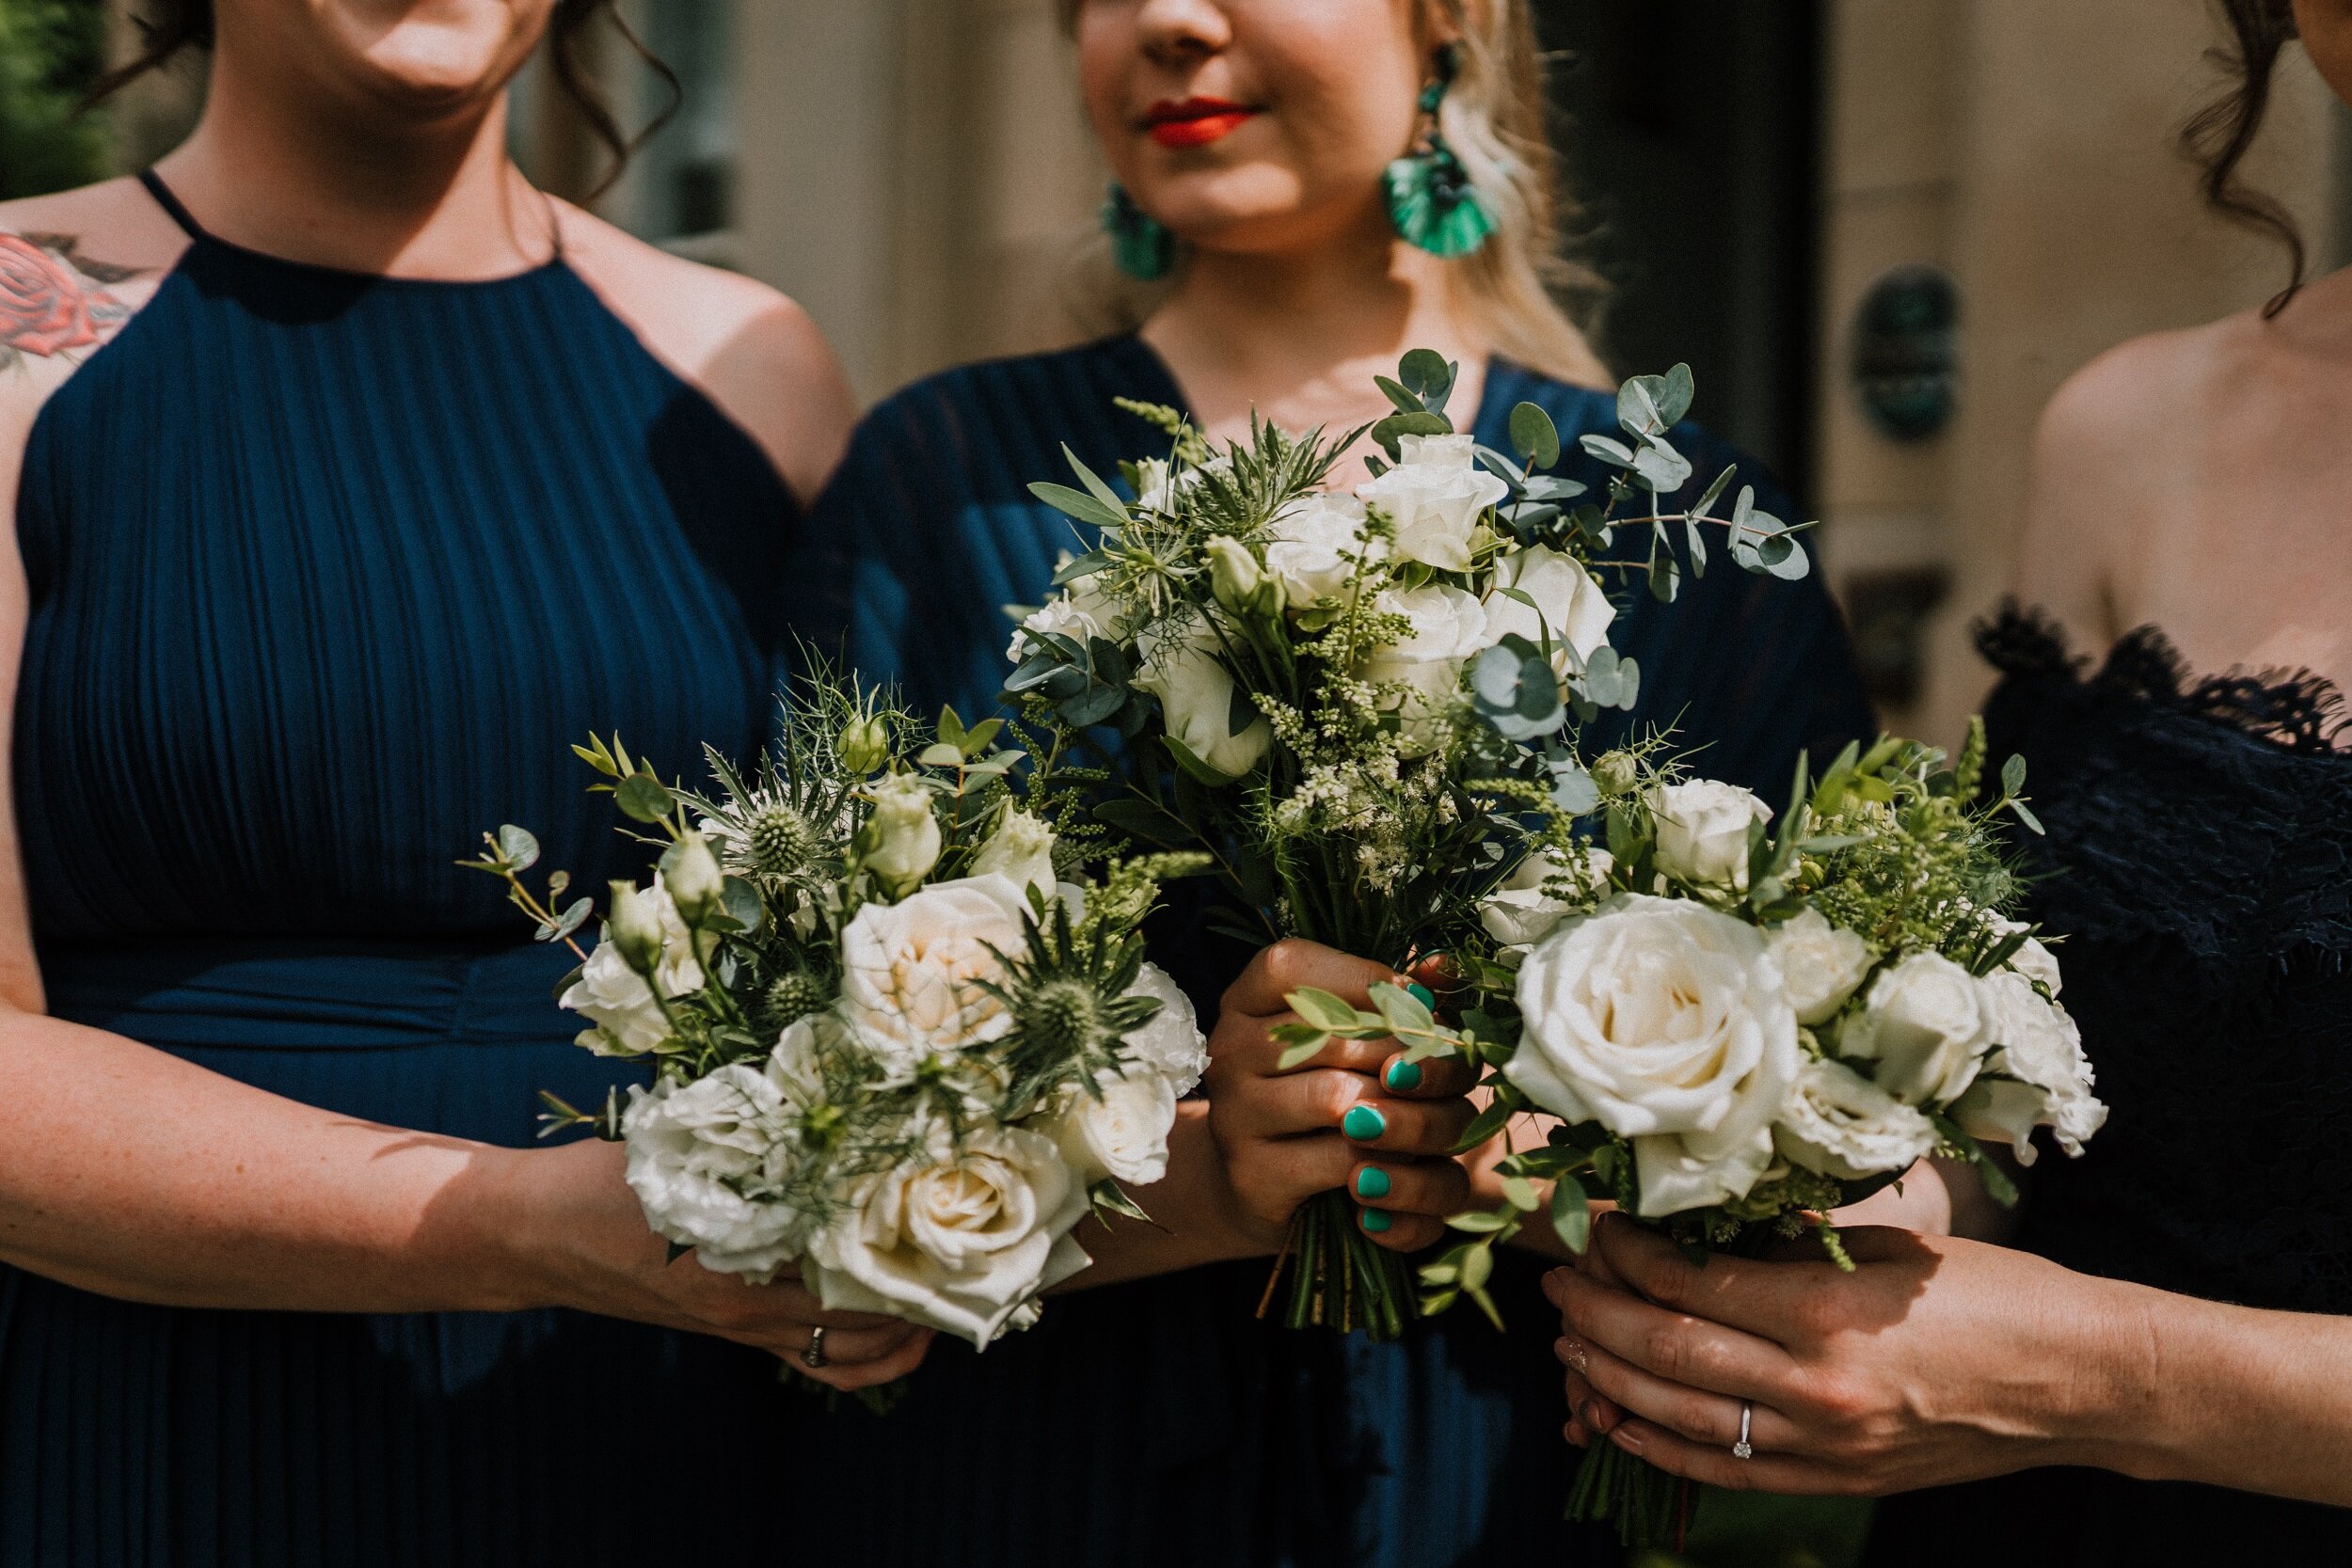 Bridesmaids dressed in Navy gowns holding wedding flowers at Bachilton Barn, Perthshire